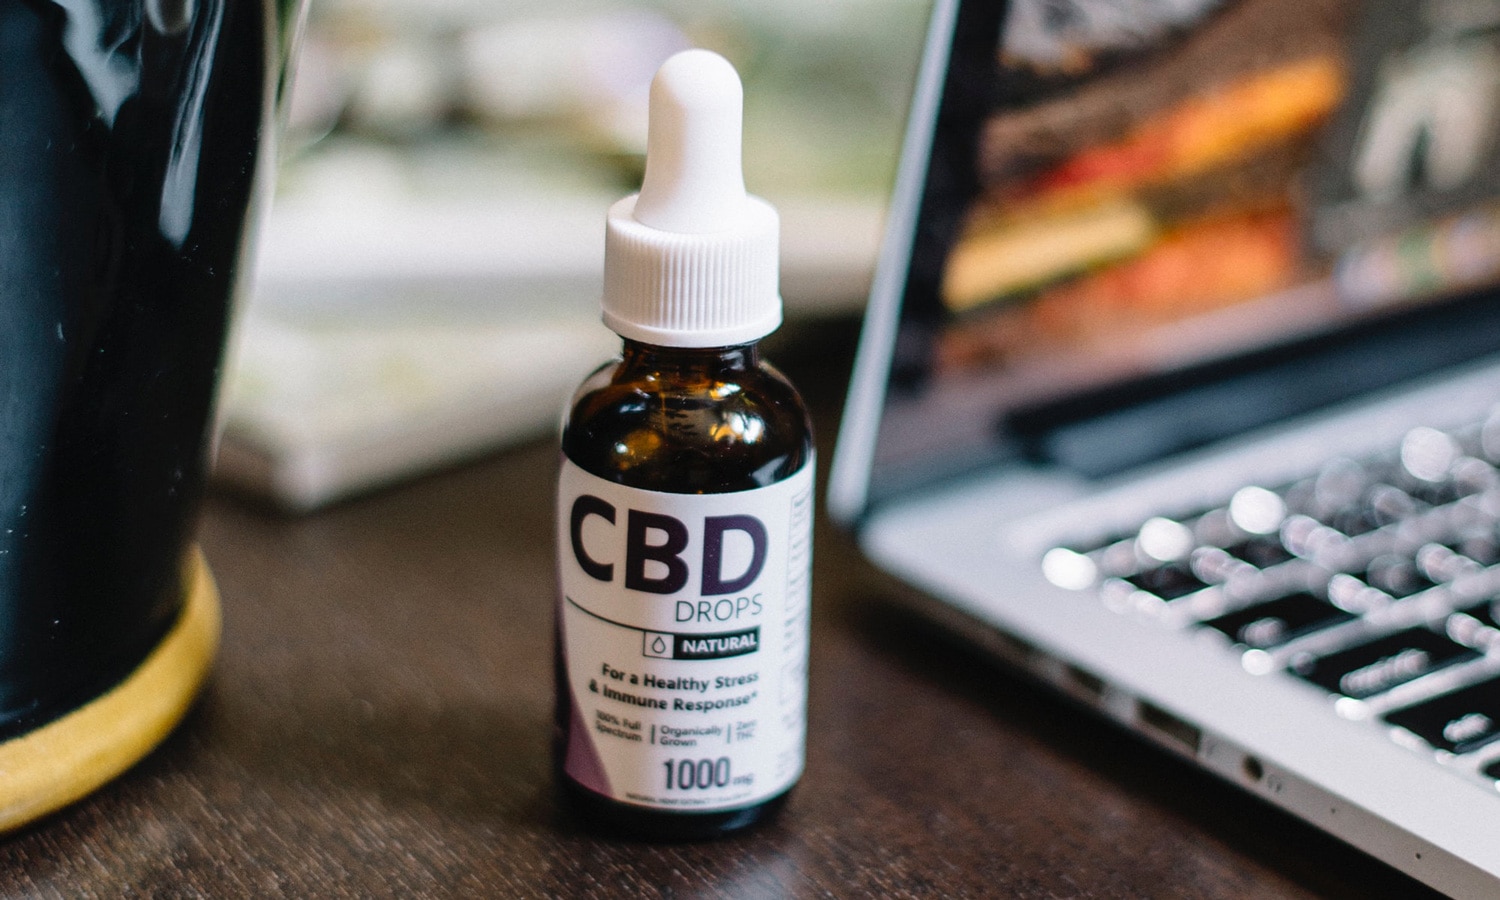 How To Find The CBD Dosage That's Best For You